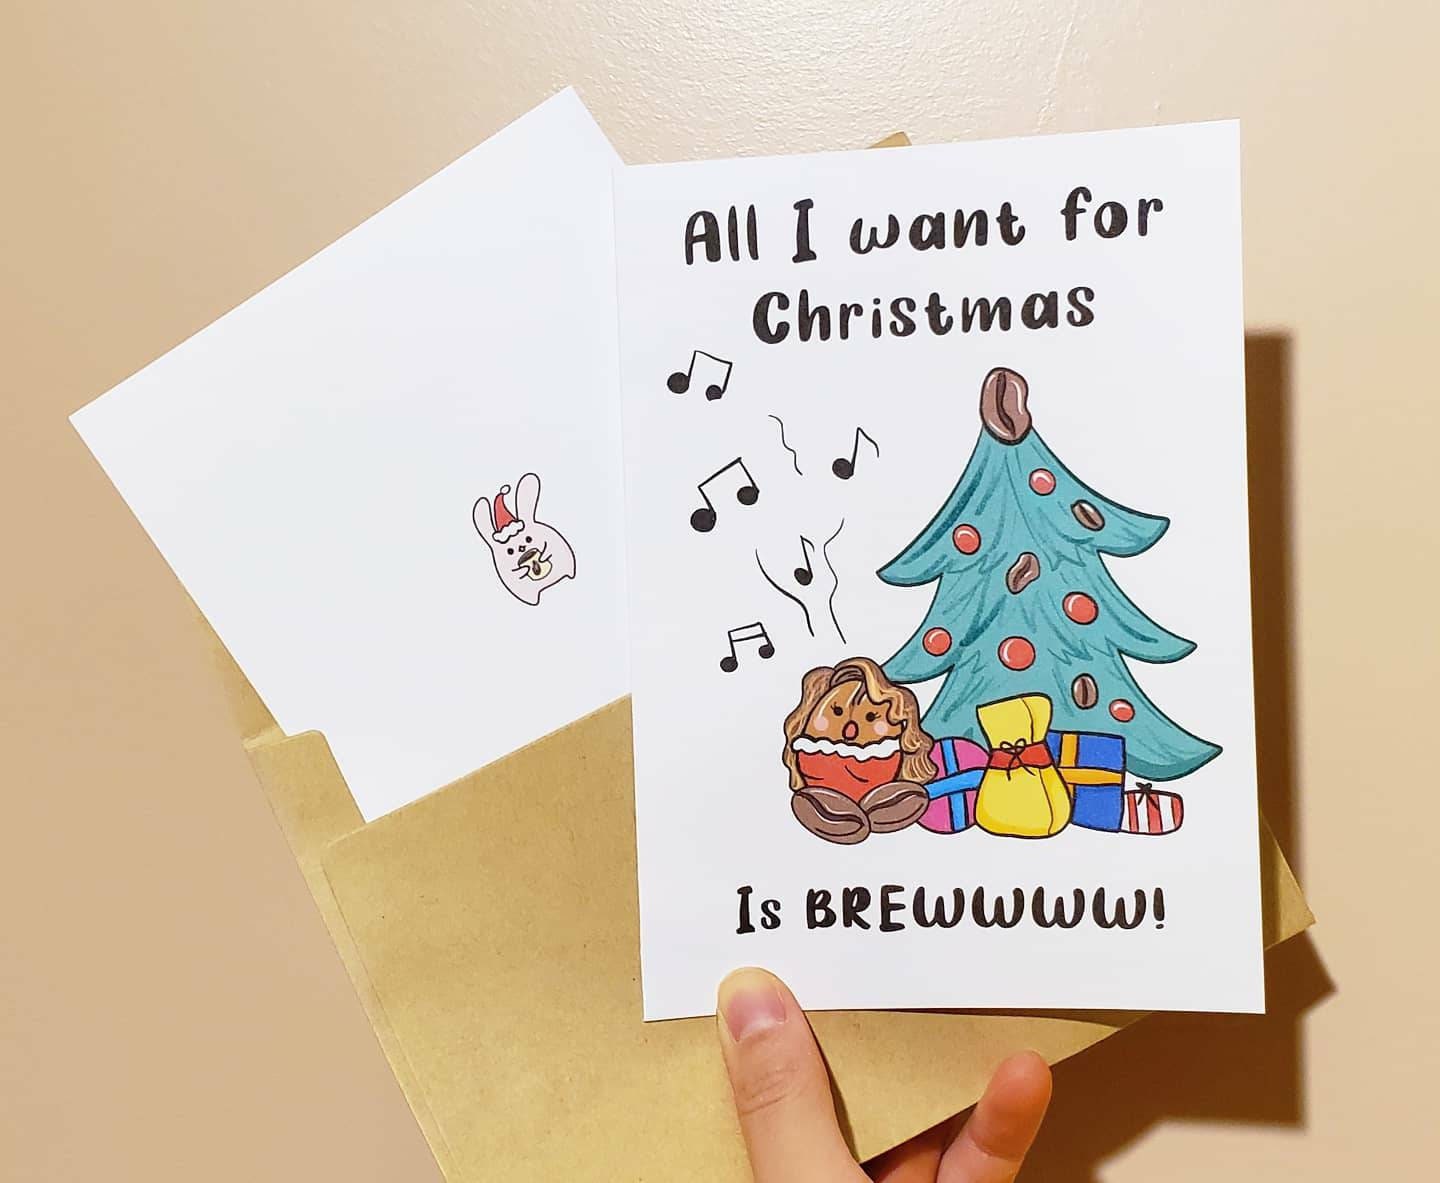 Coffee Christmas Cards | Have a Merry Chemex | All I Want For Christmas is Brew